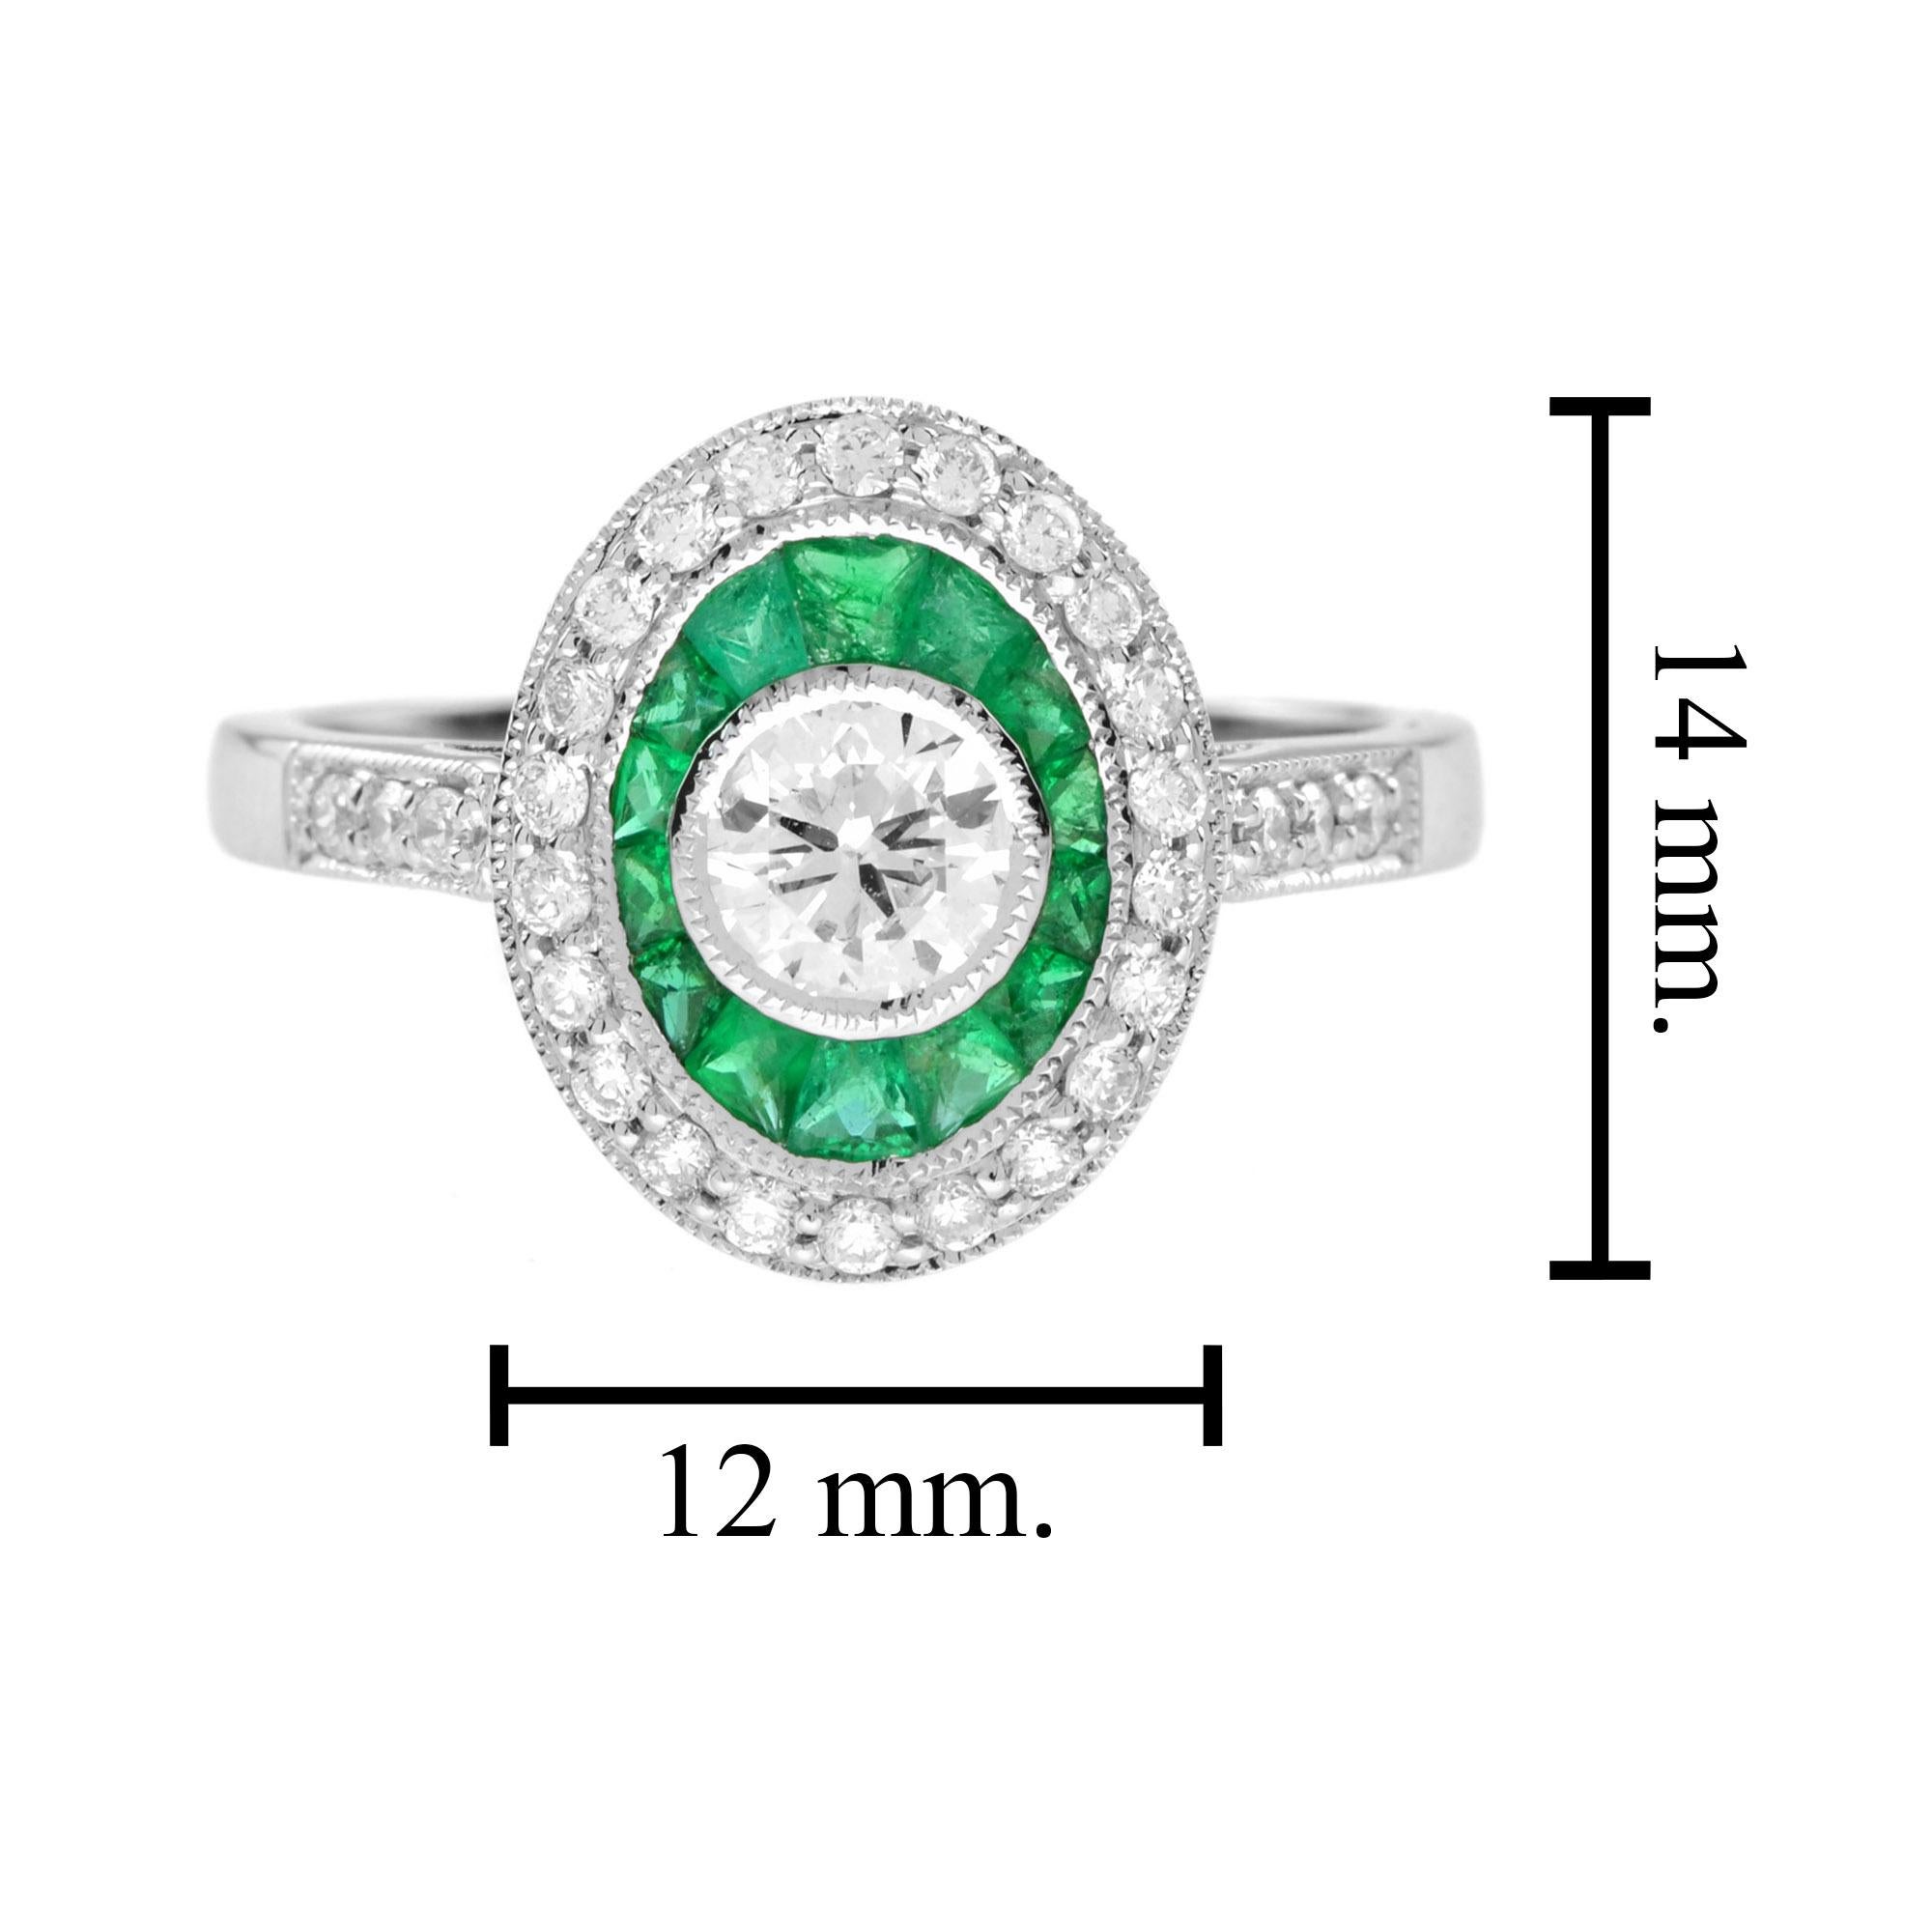 Art Deco Style Diamond and French Cut Emerald Target Ring in 18K White Gold For Sale 3